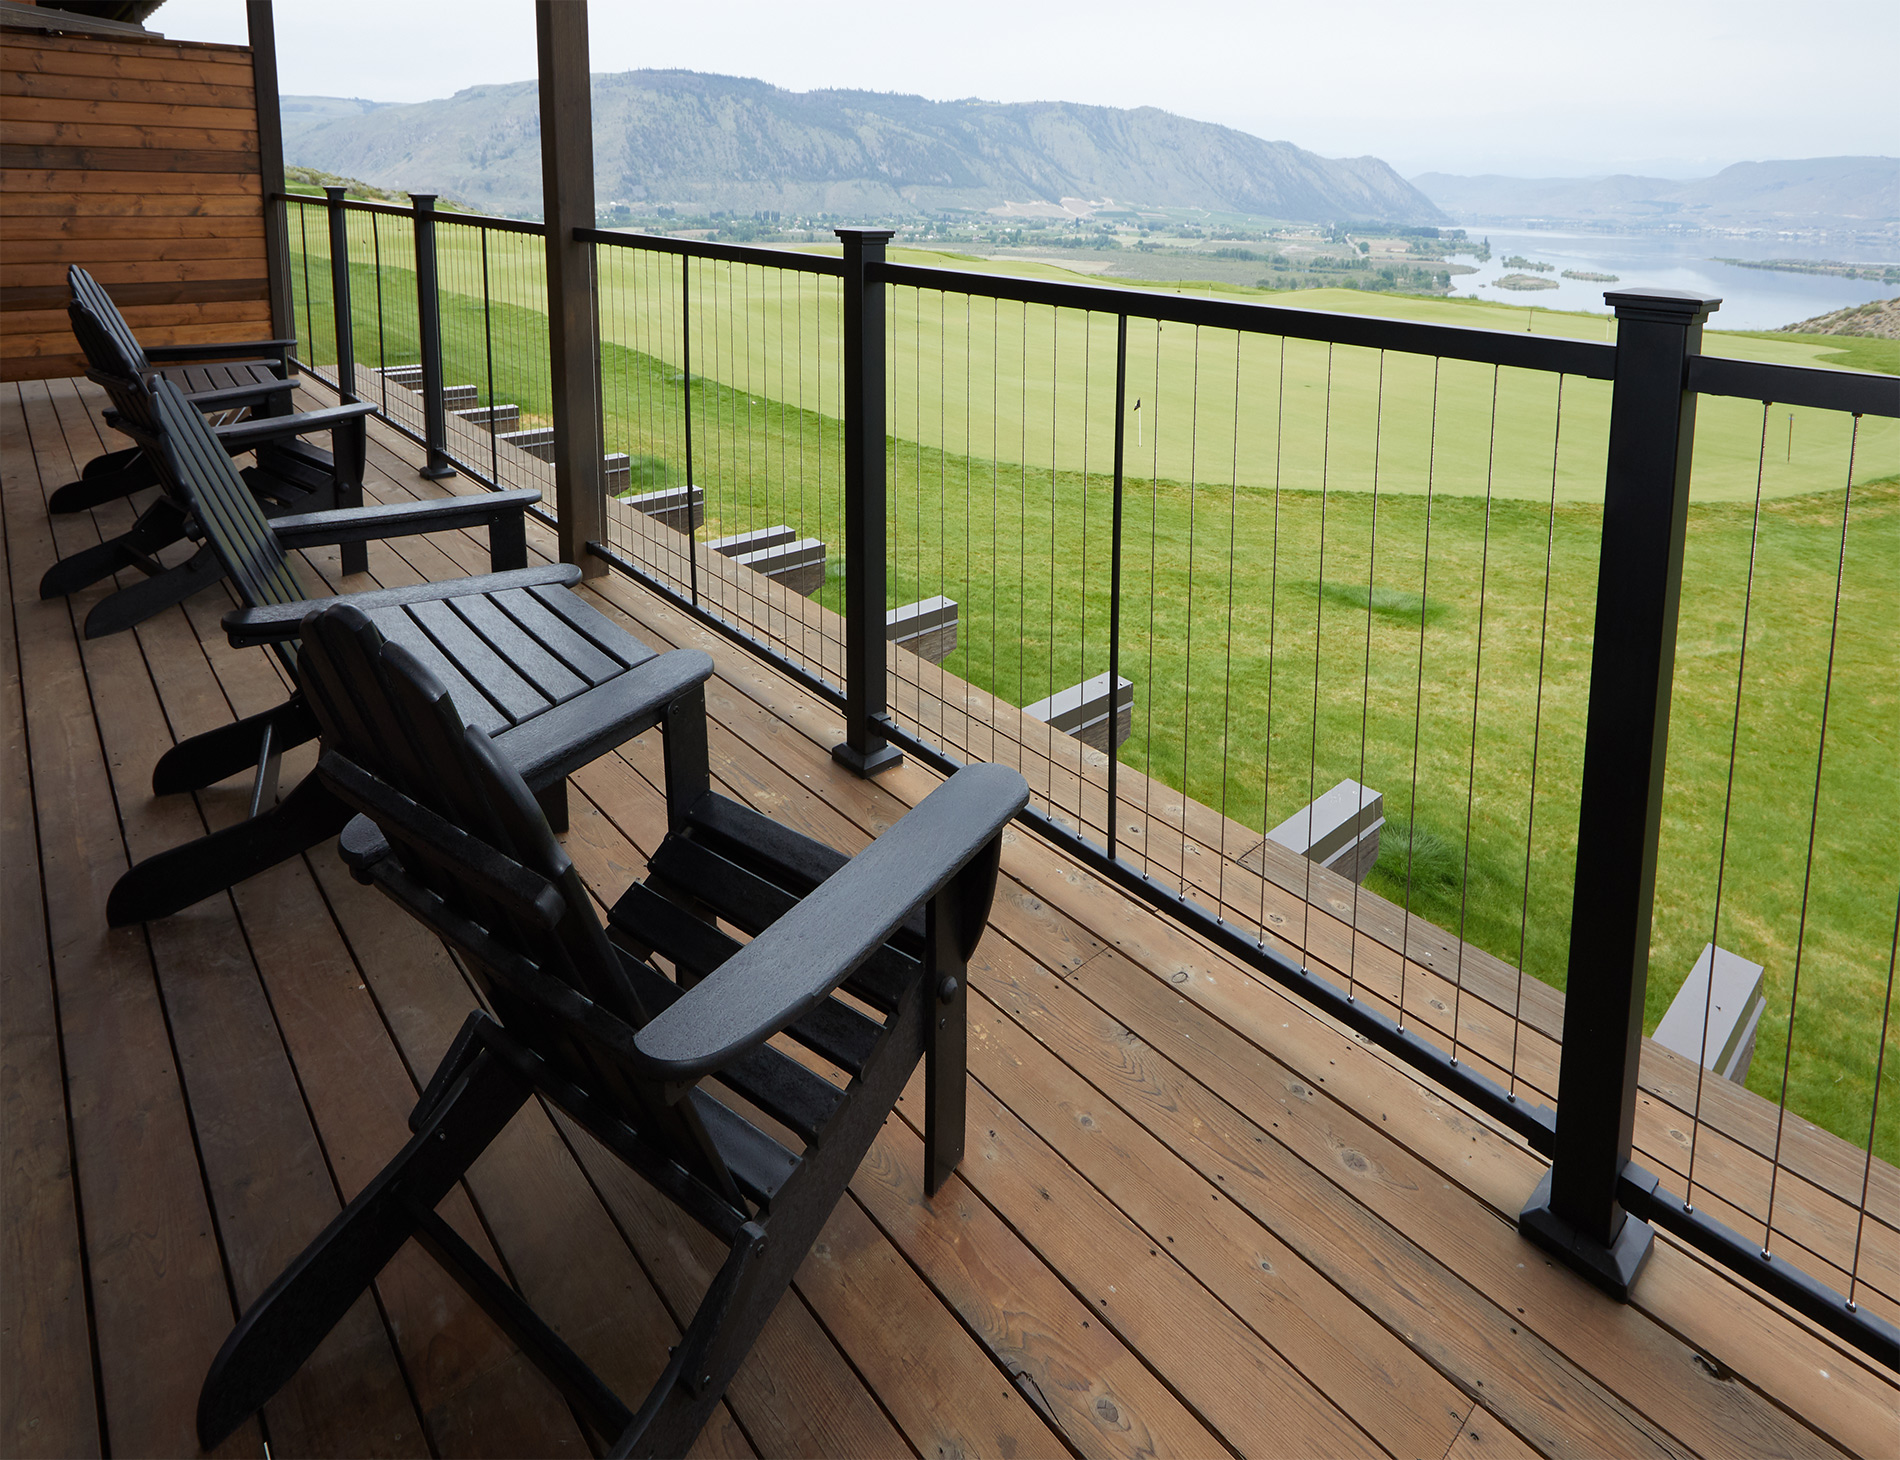 Balcony with railing perched over lawn